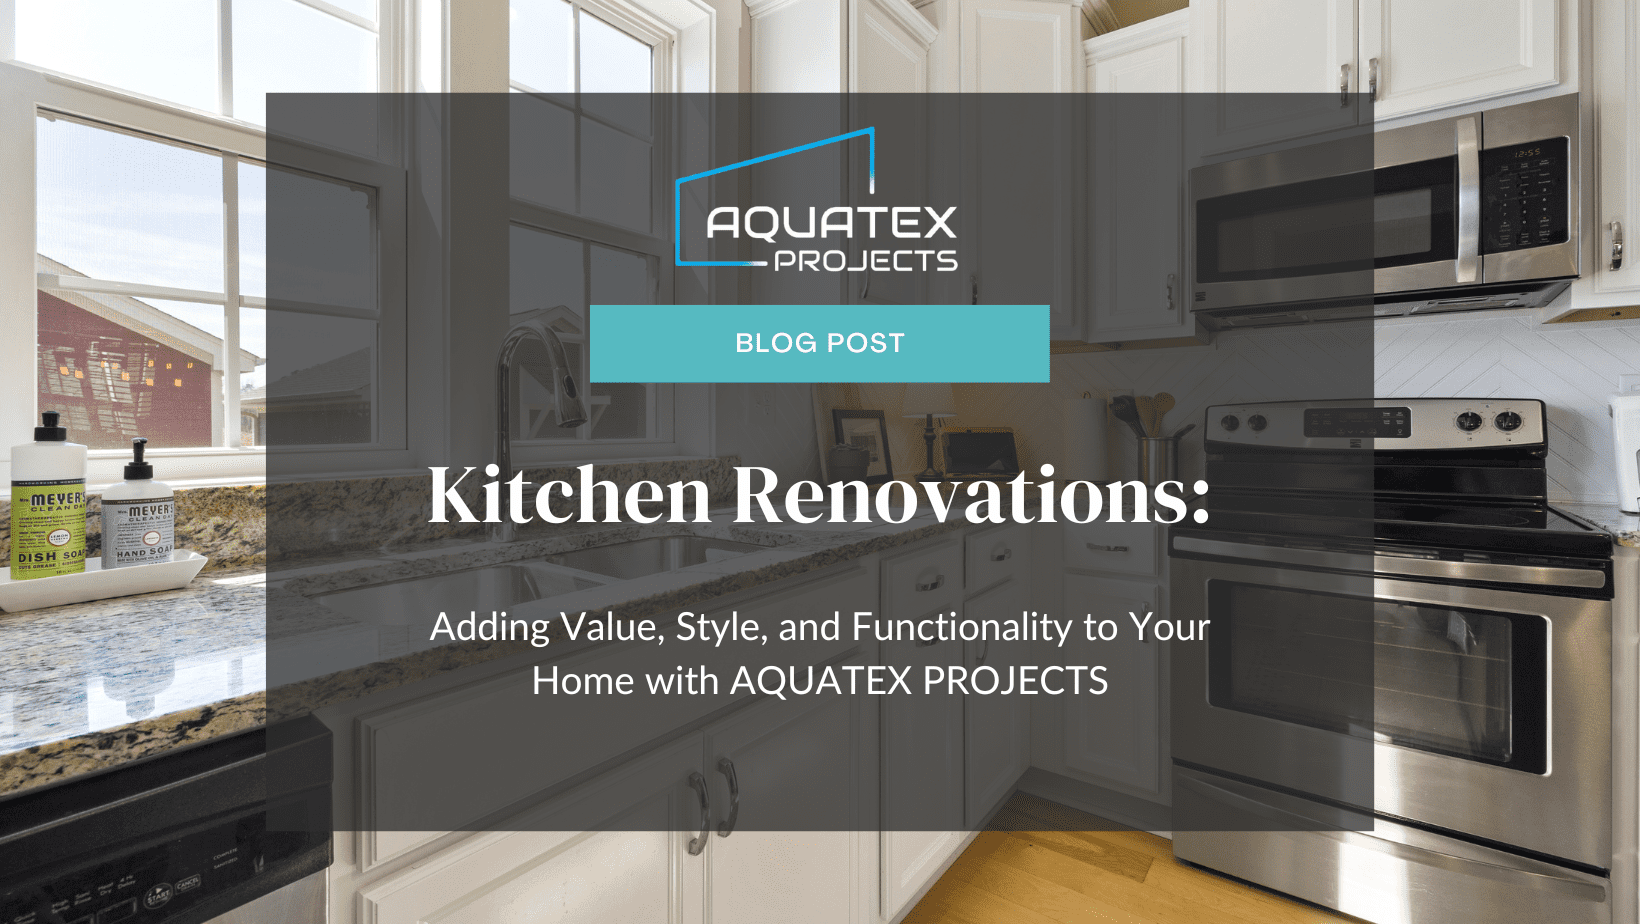 Kitchen Renovations: Adding Value, Style, and Functionality to Your Home with AQUATEX PROJECTS